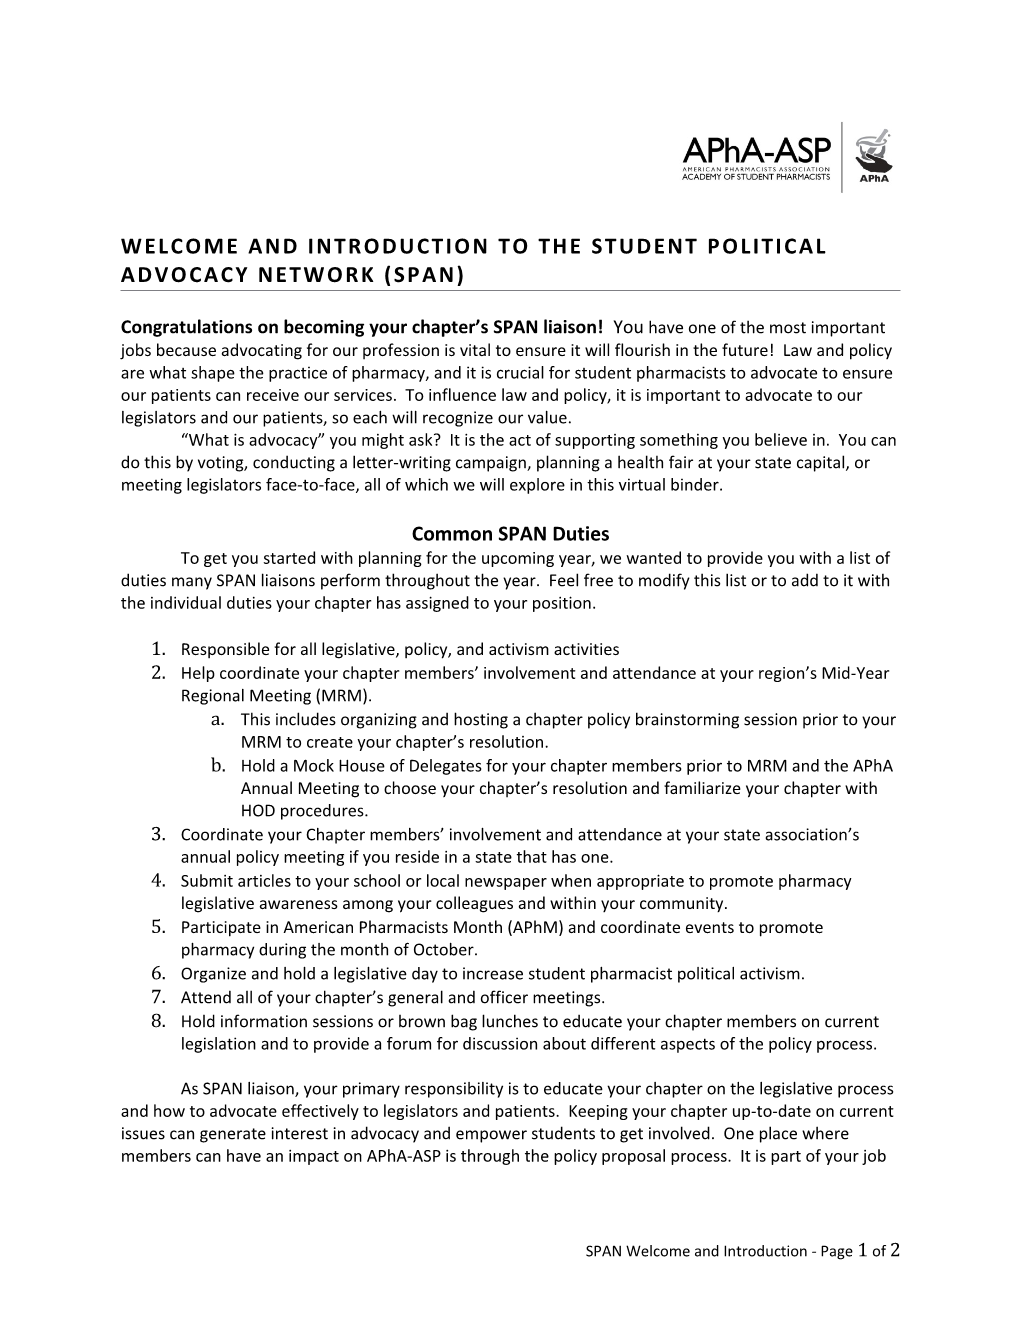 Welcome and Introduction to the Student Political Advocacy Network (Span)